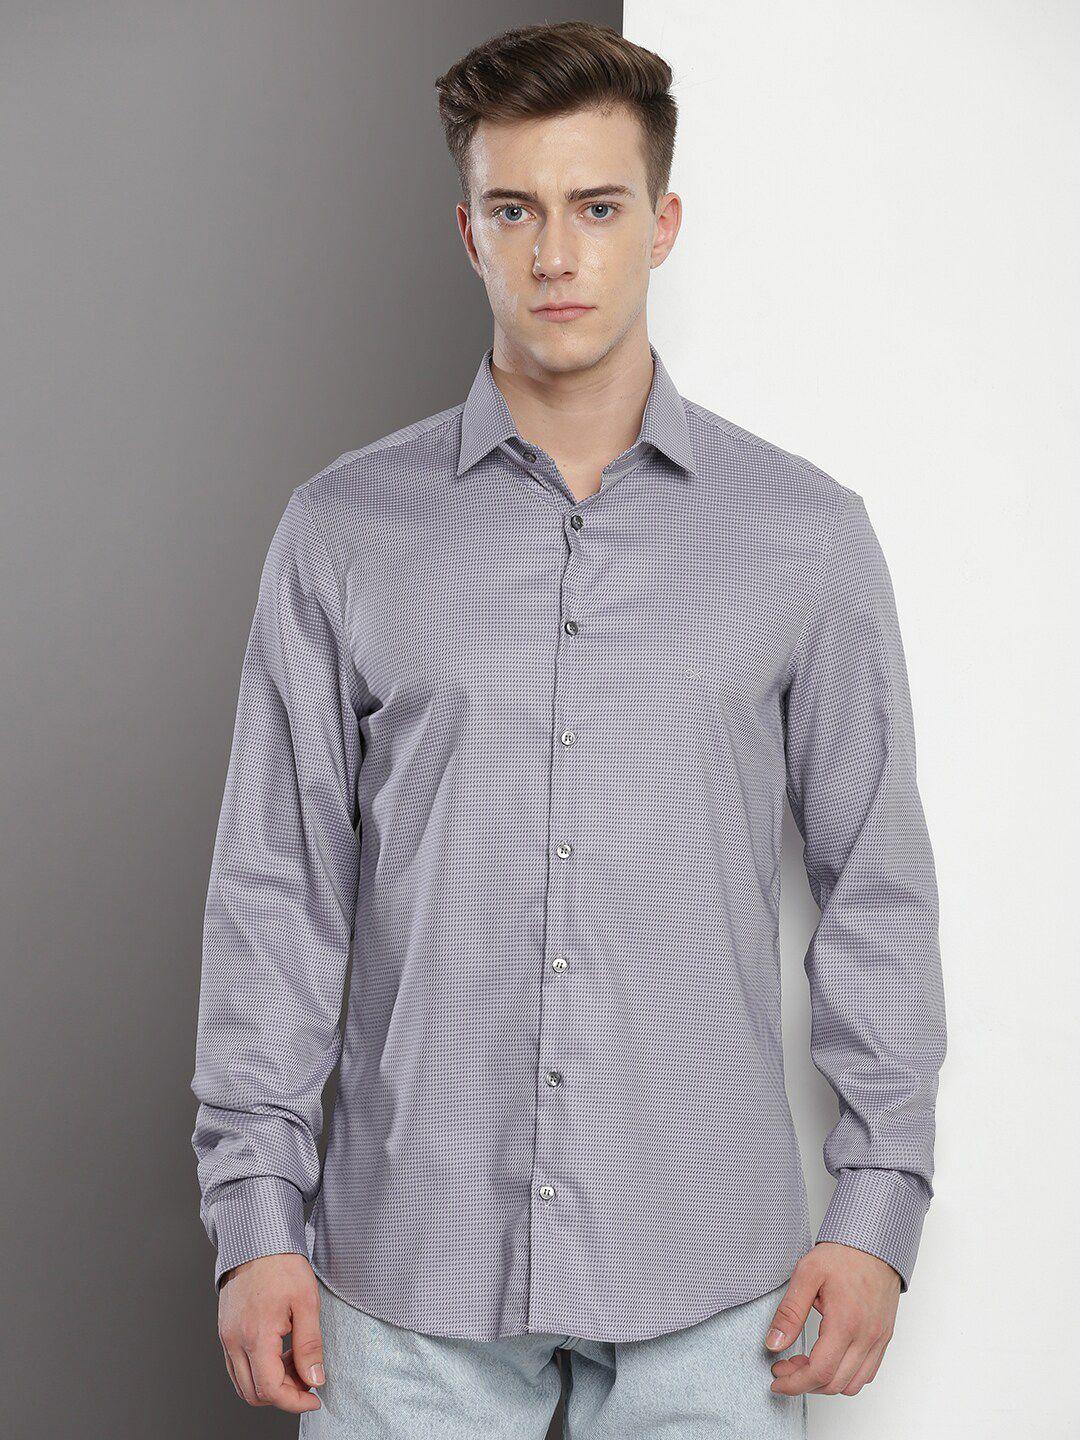 calvin-klein-slim-fit-opaque-micro-ditsy-printed-cotton-casual-shirt